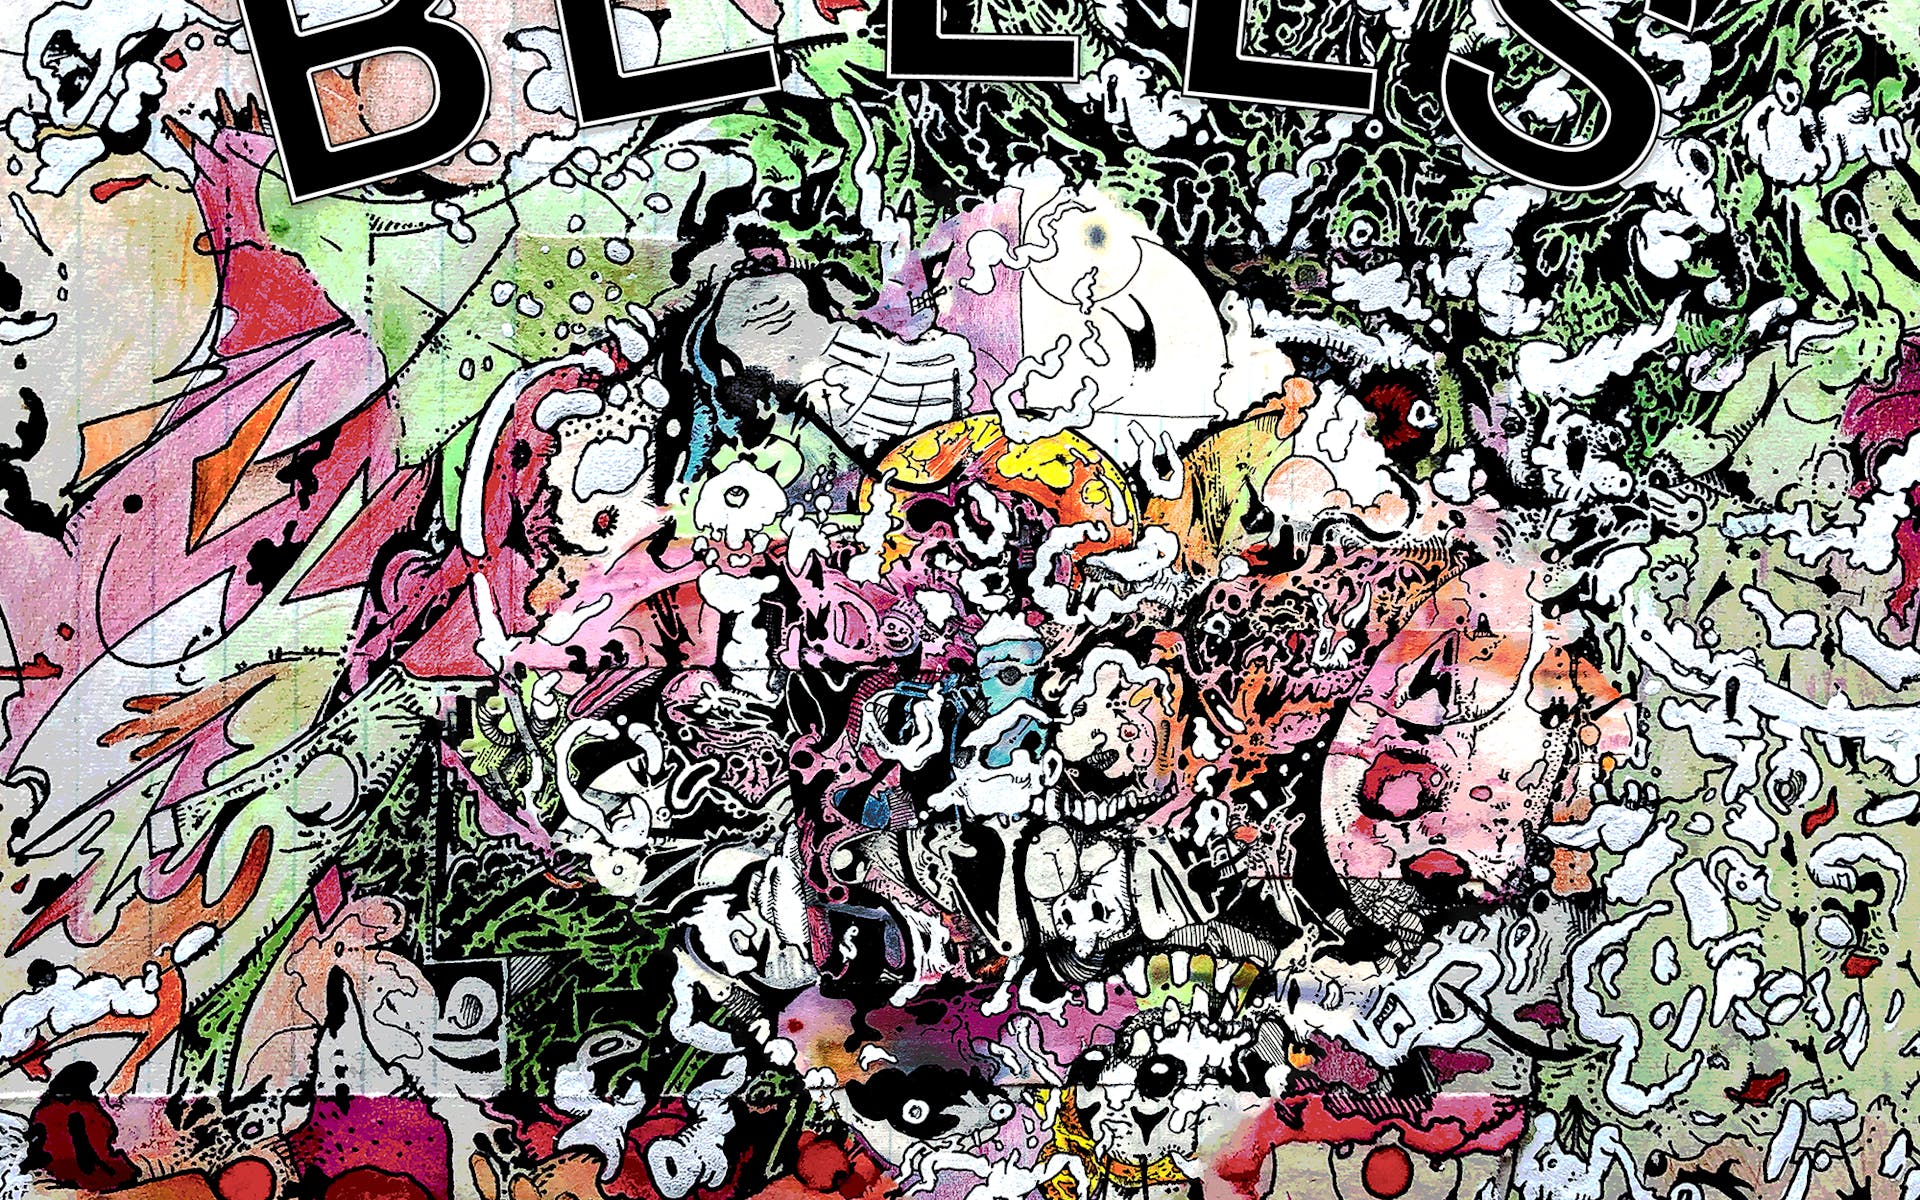 Album cover featuring chaotic and dense textural illustrations and colors